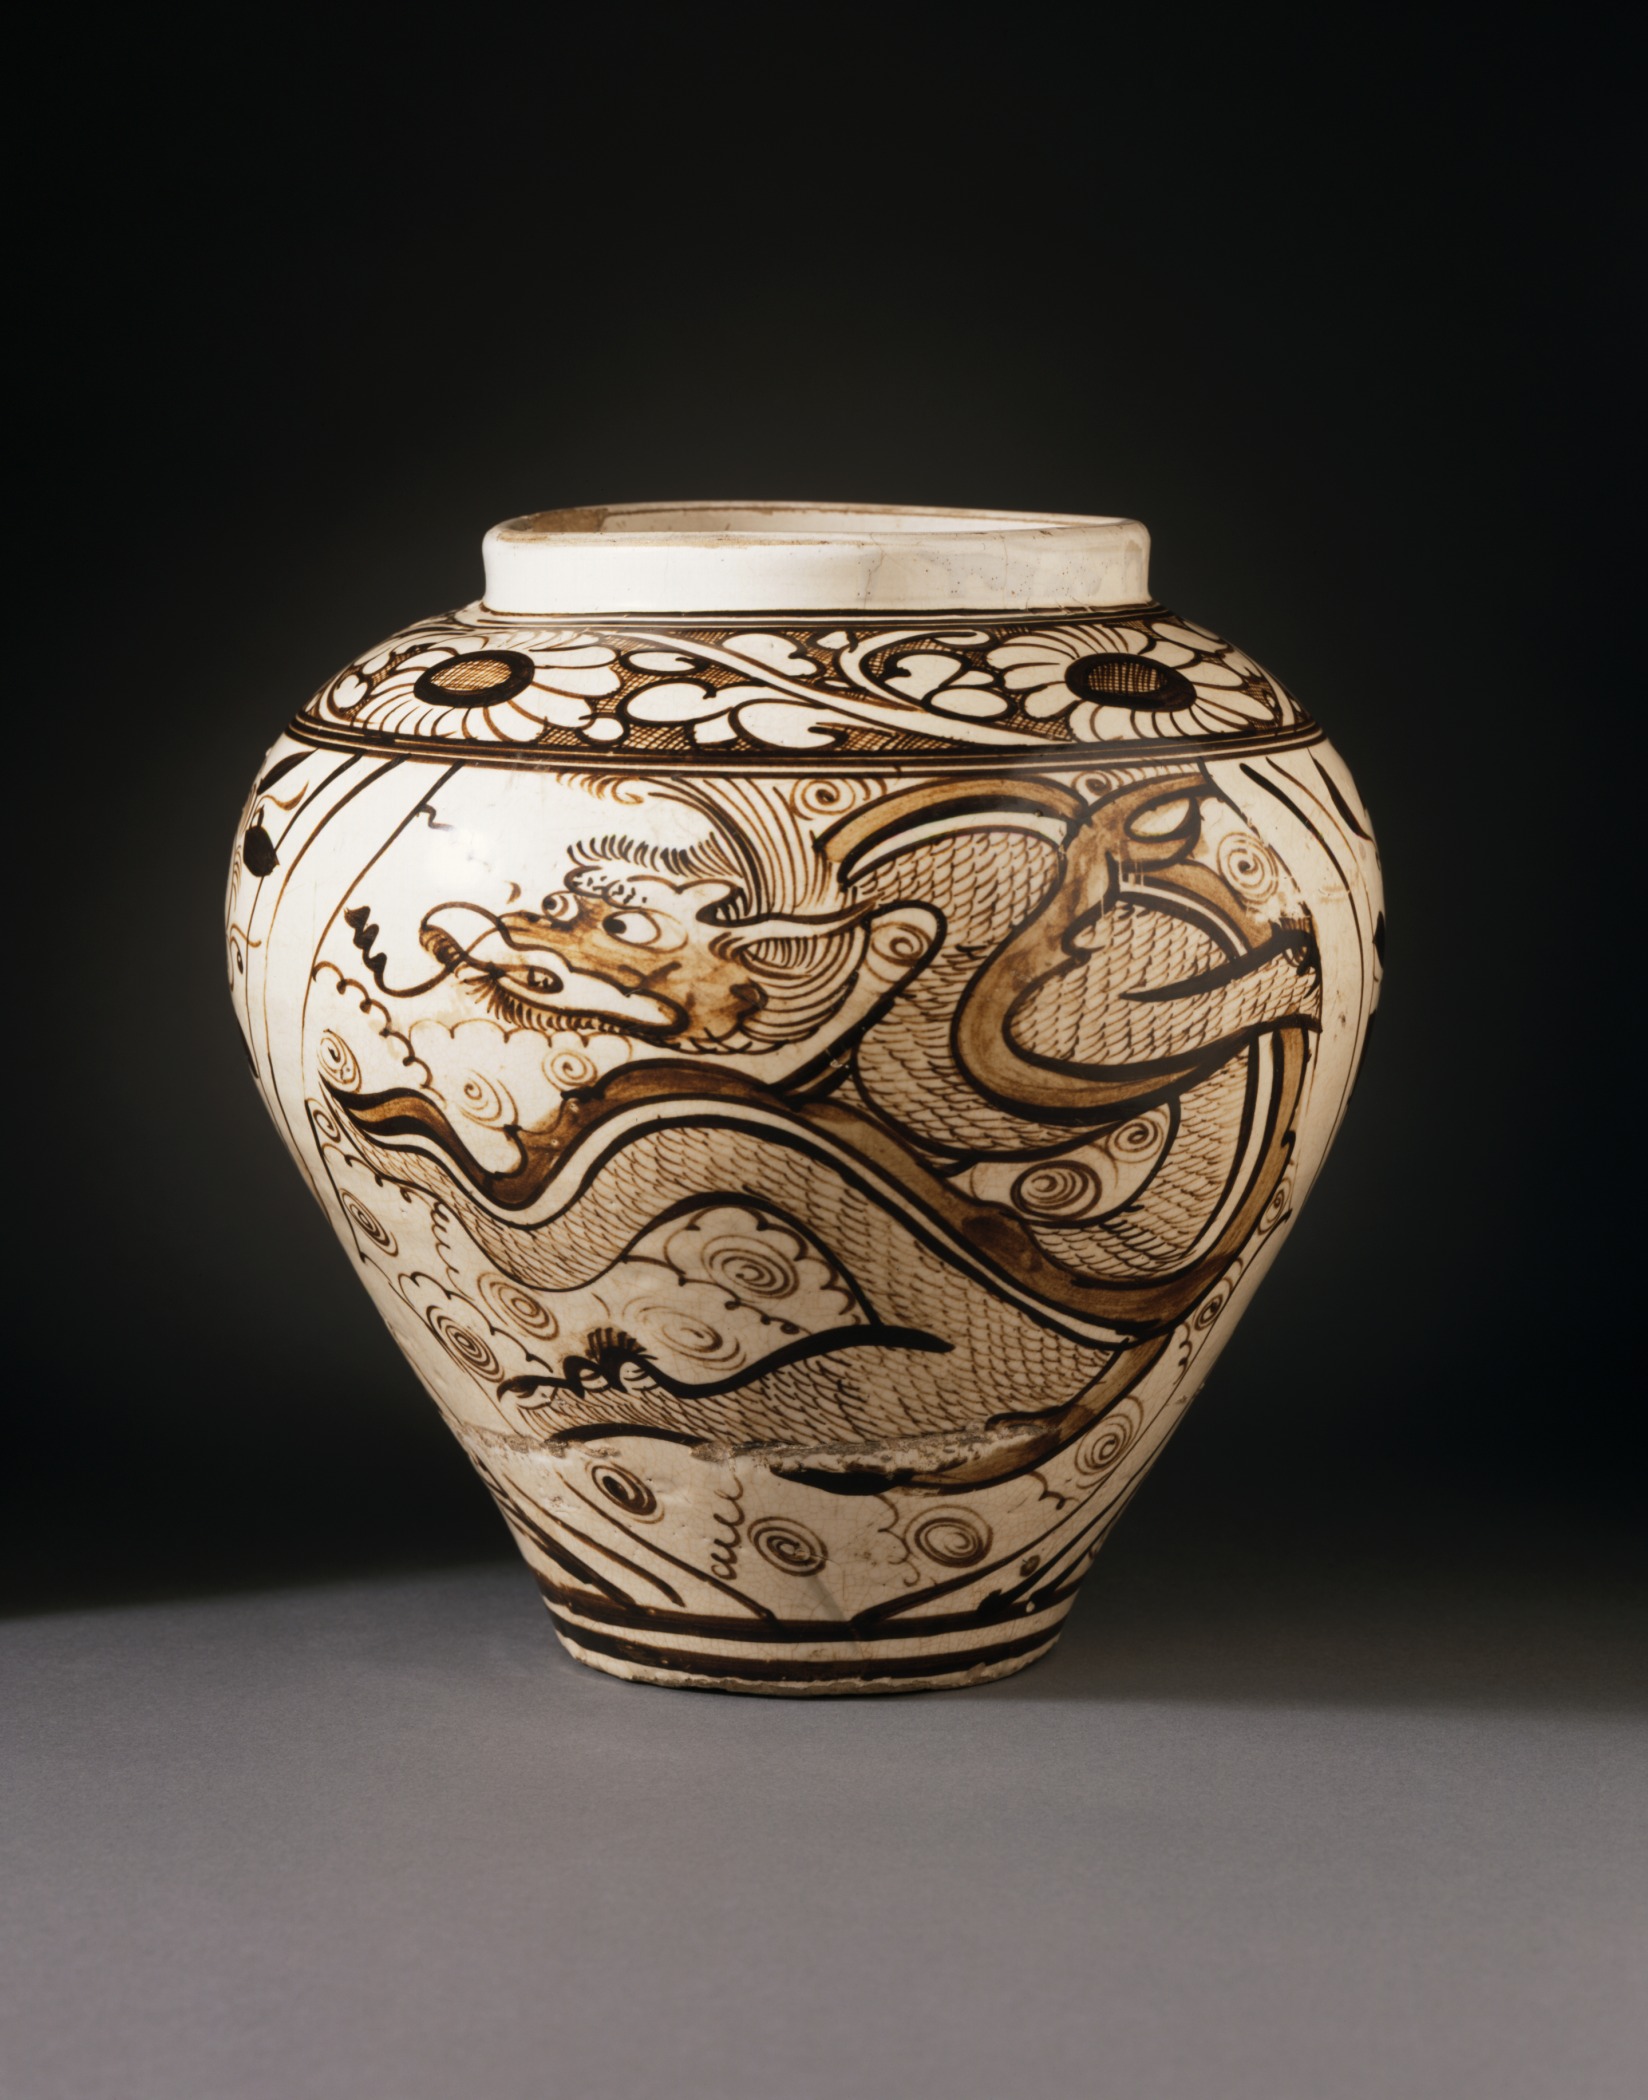 a vase is decorated with ornate designs on it